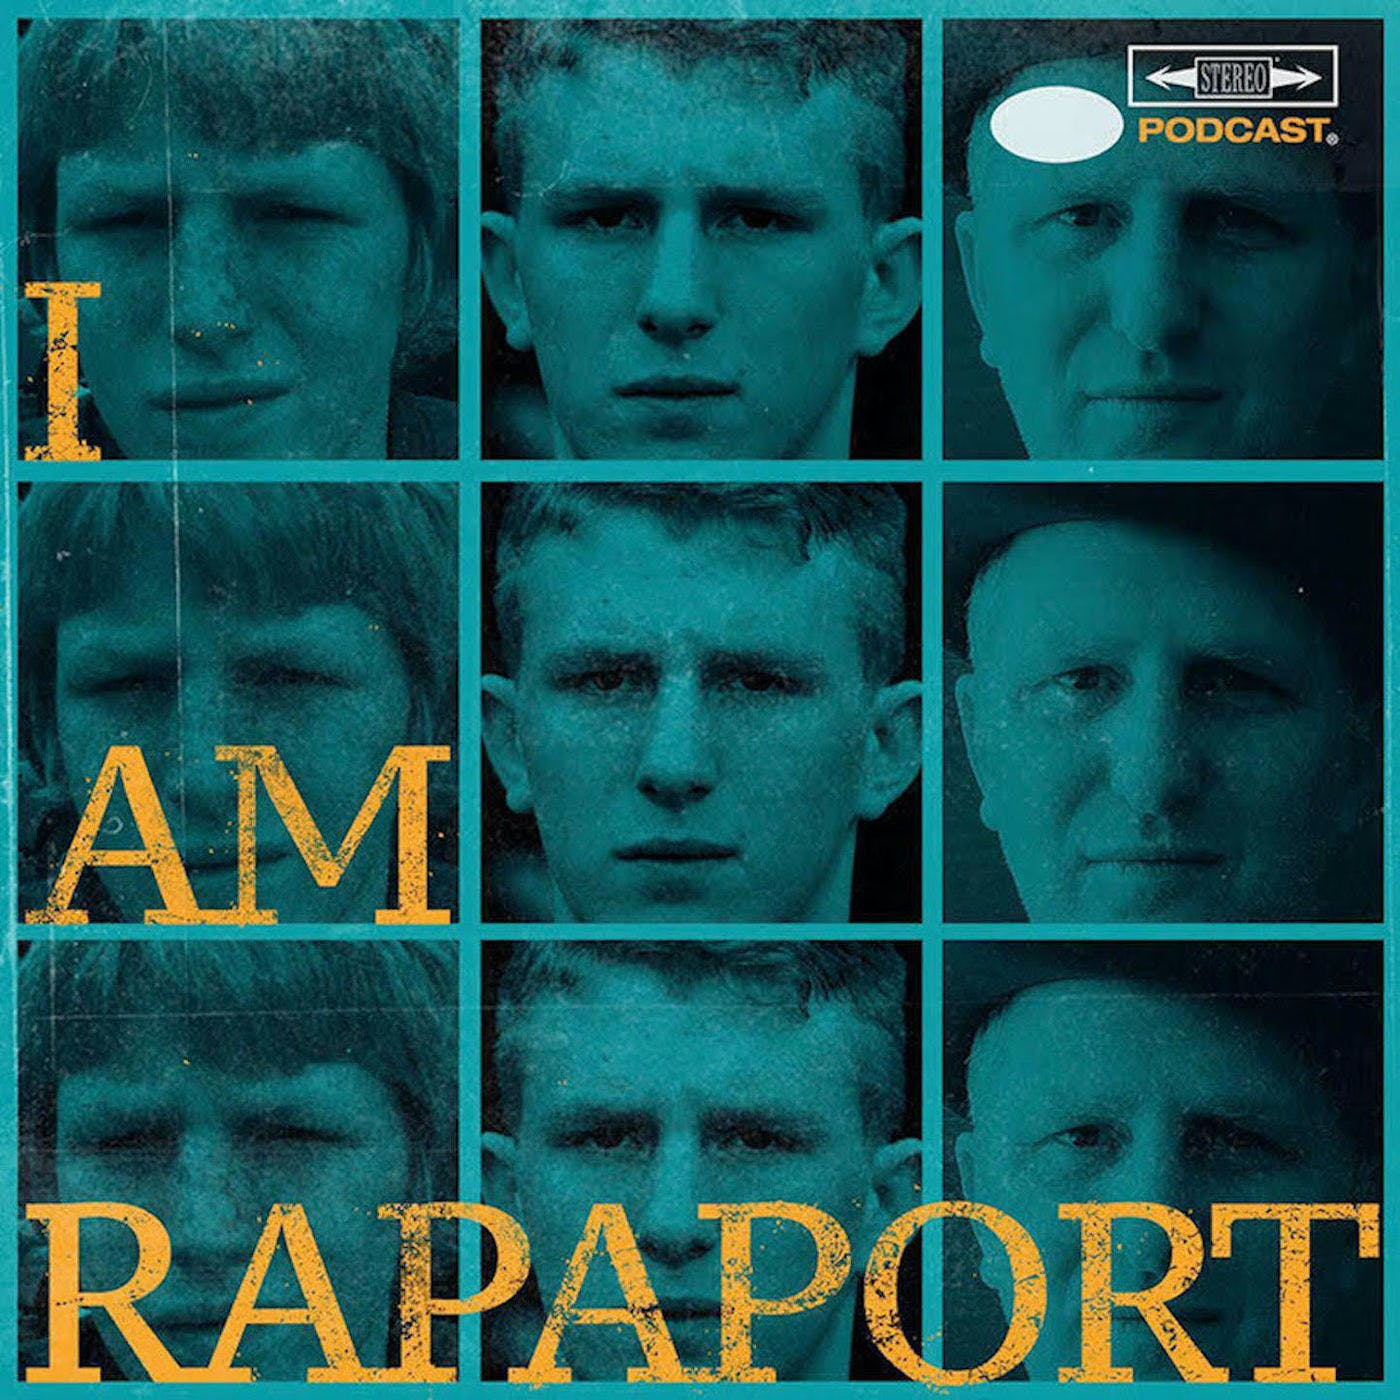 EP167 - LEBRON JAMES BASH EXTRAVAGANZA - THE GOOD, THE BAD AND THE WHY DO YOU SHAVE YOUR ARMPITS? - BEST OF I AM RAPAPORT: STEREO PODCAST EDITION